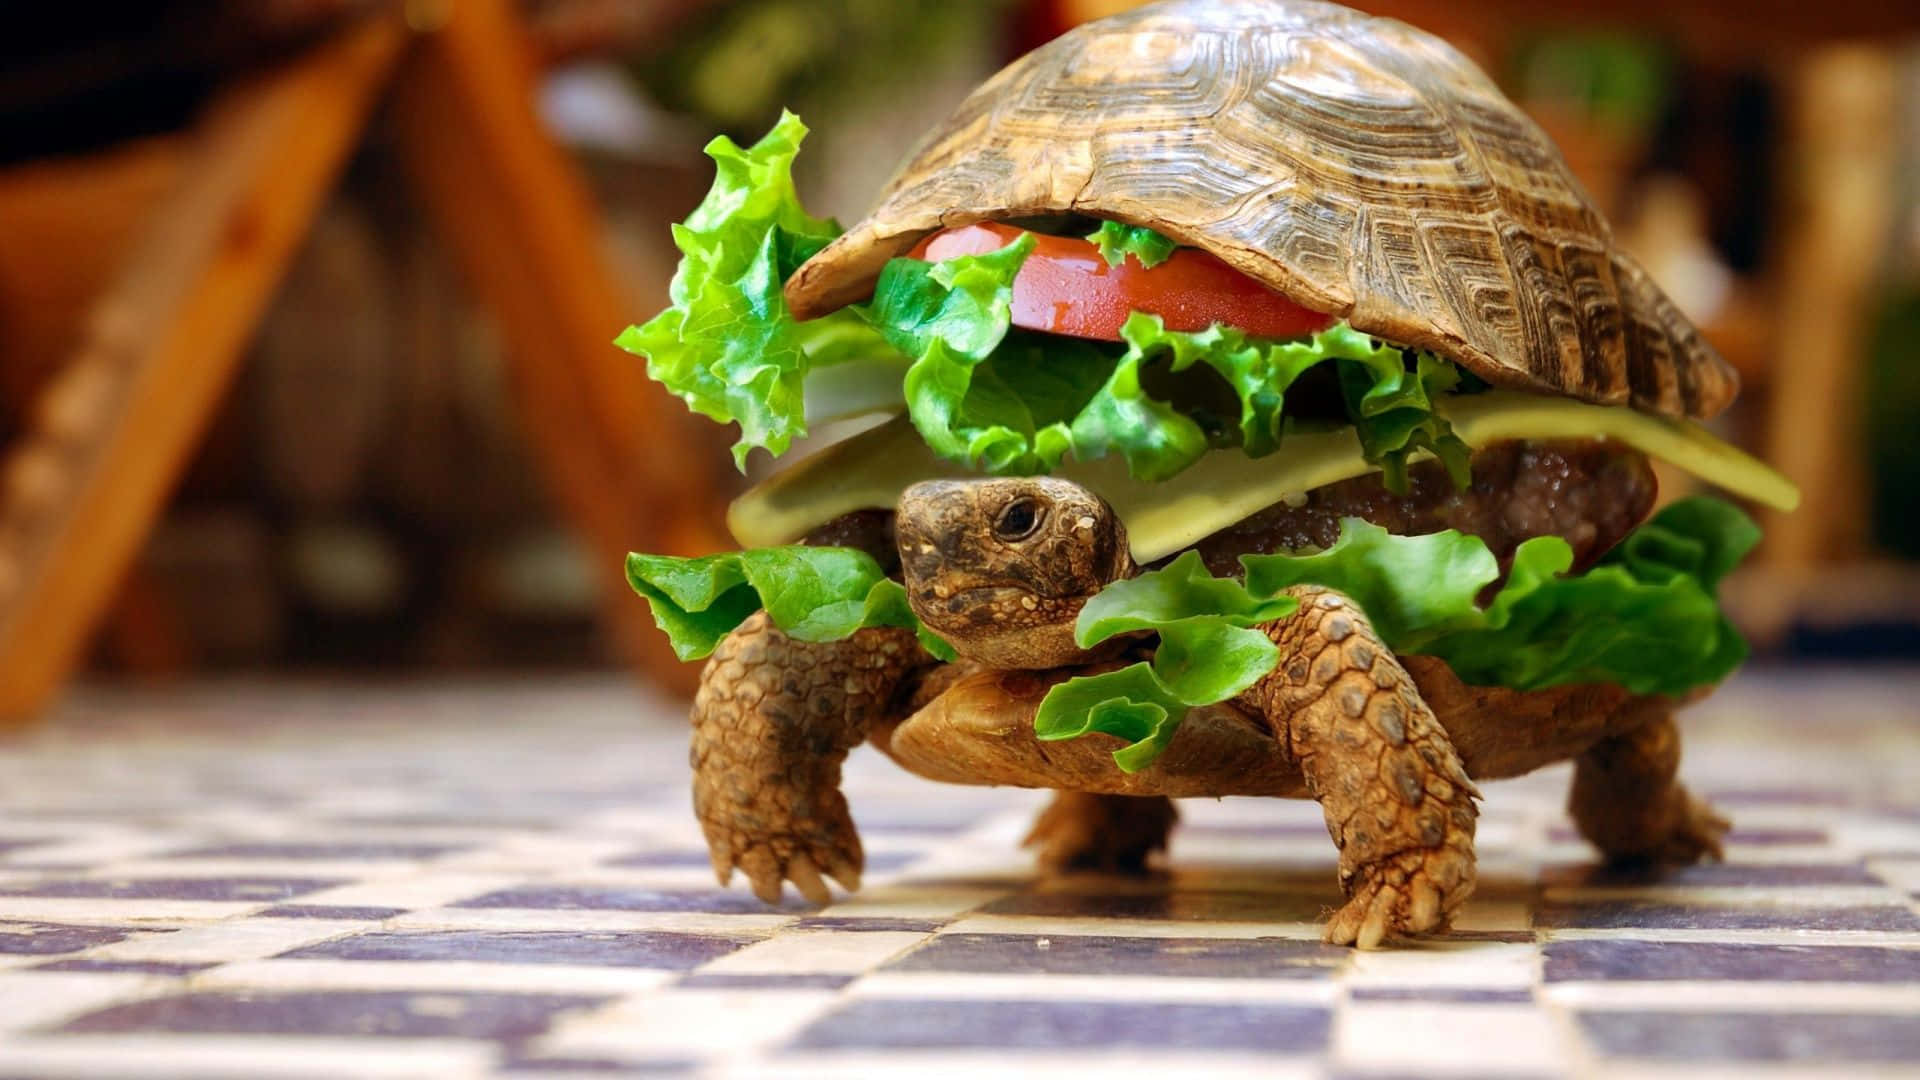 A Tortoise Is Walking Around With A Hamburger On Its Back